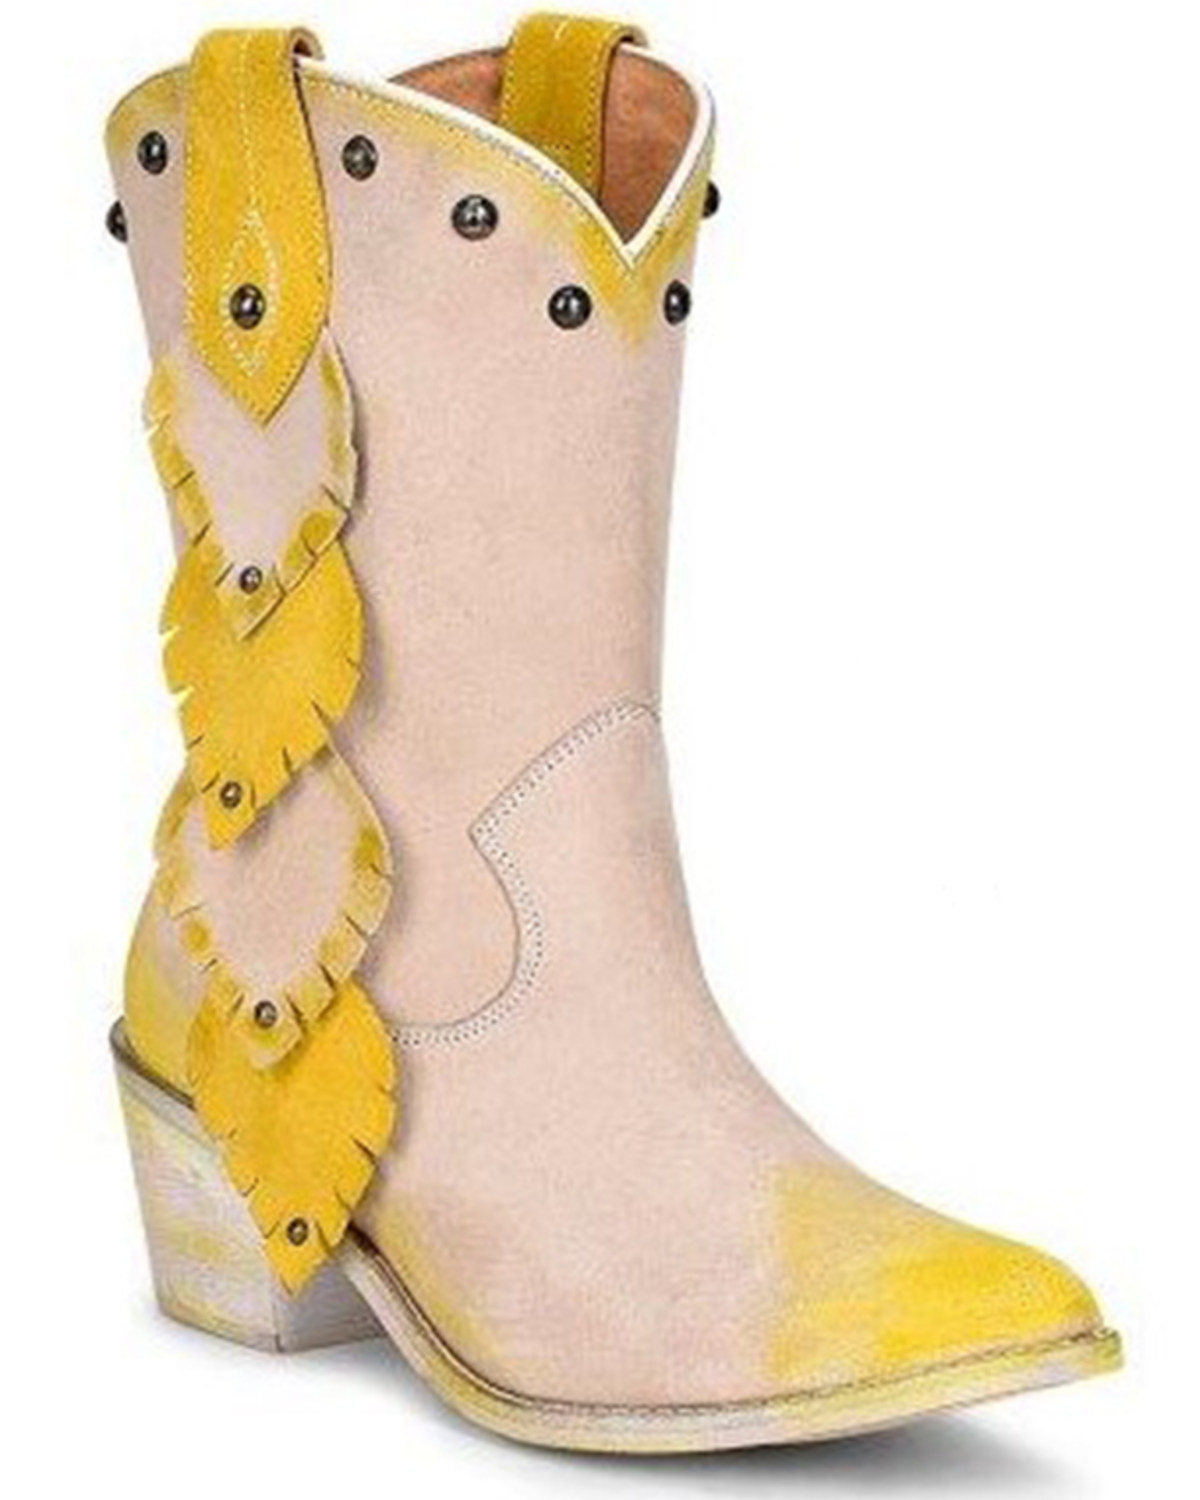 Corral Women's Painted Leaf Studded Western Boots - Snip Toe